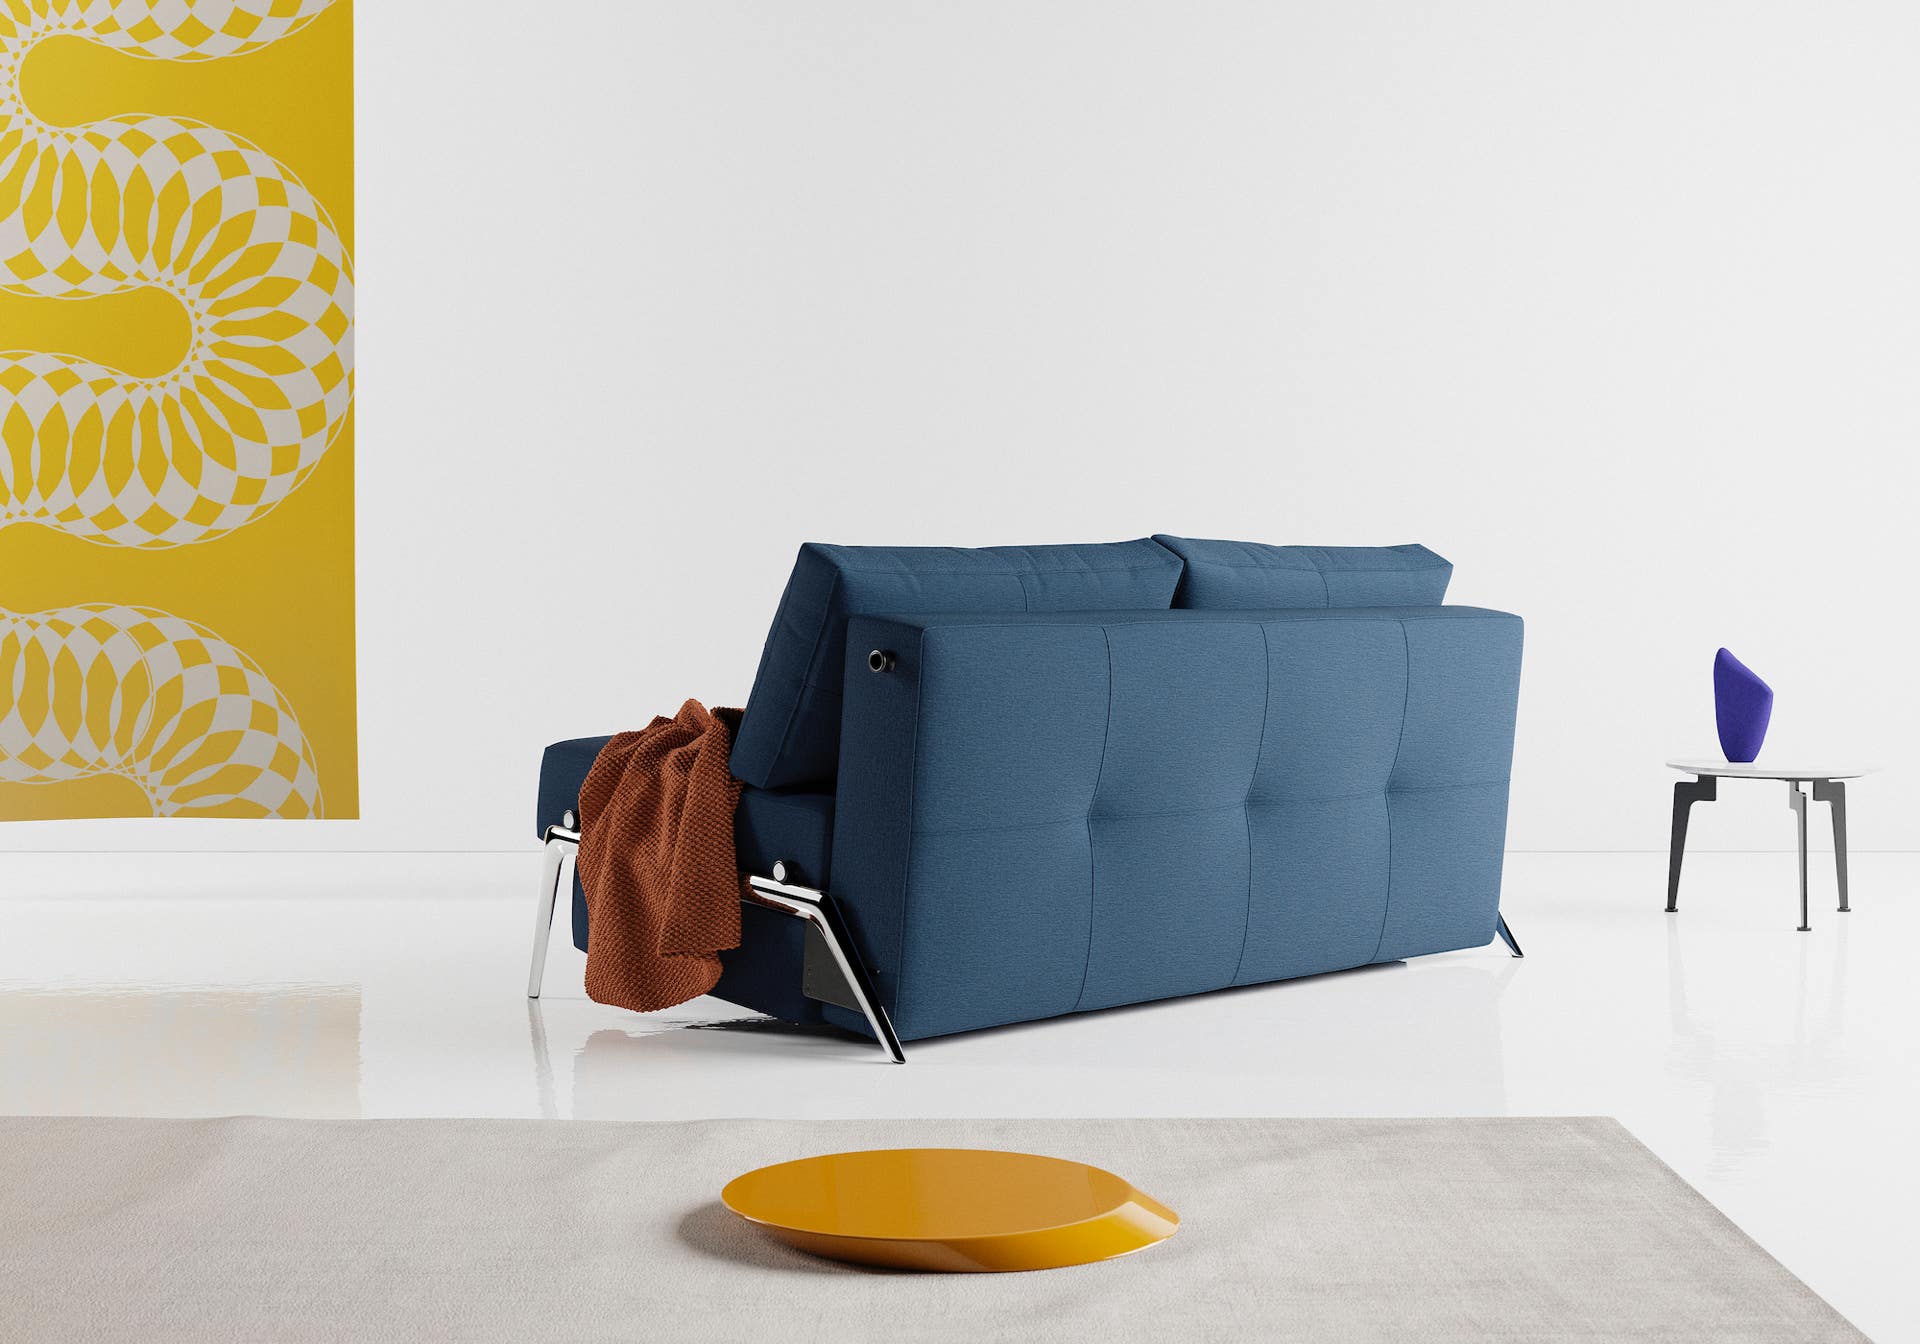 Canapé et Fauteuil Convertible Cubed Per Weiss, Oliver & Lukas WeissKrogh, 2009/2015/2019